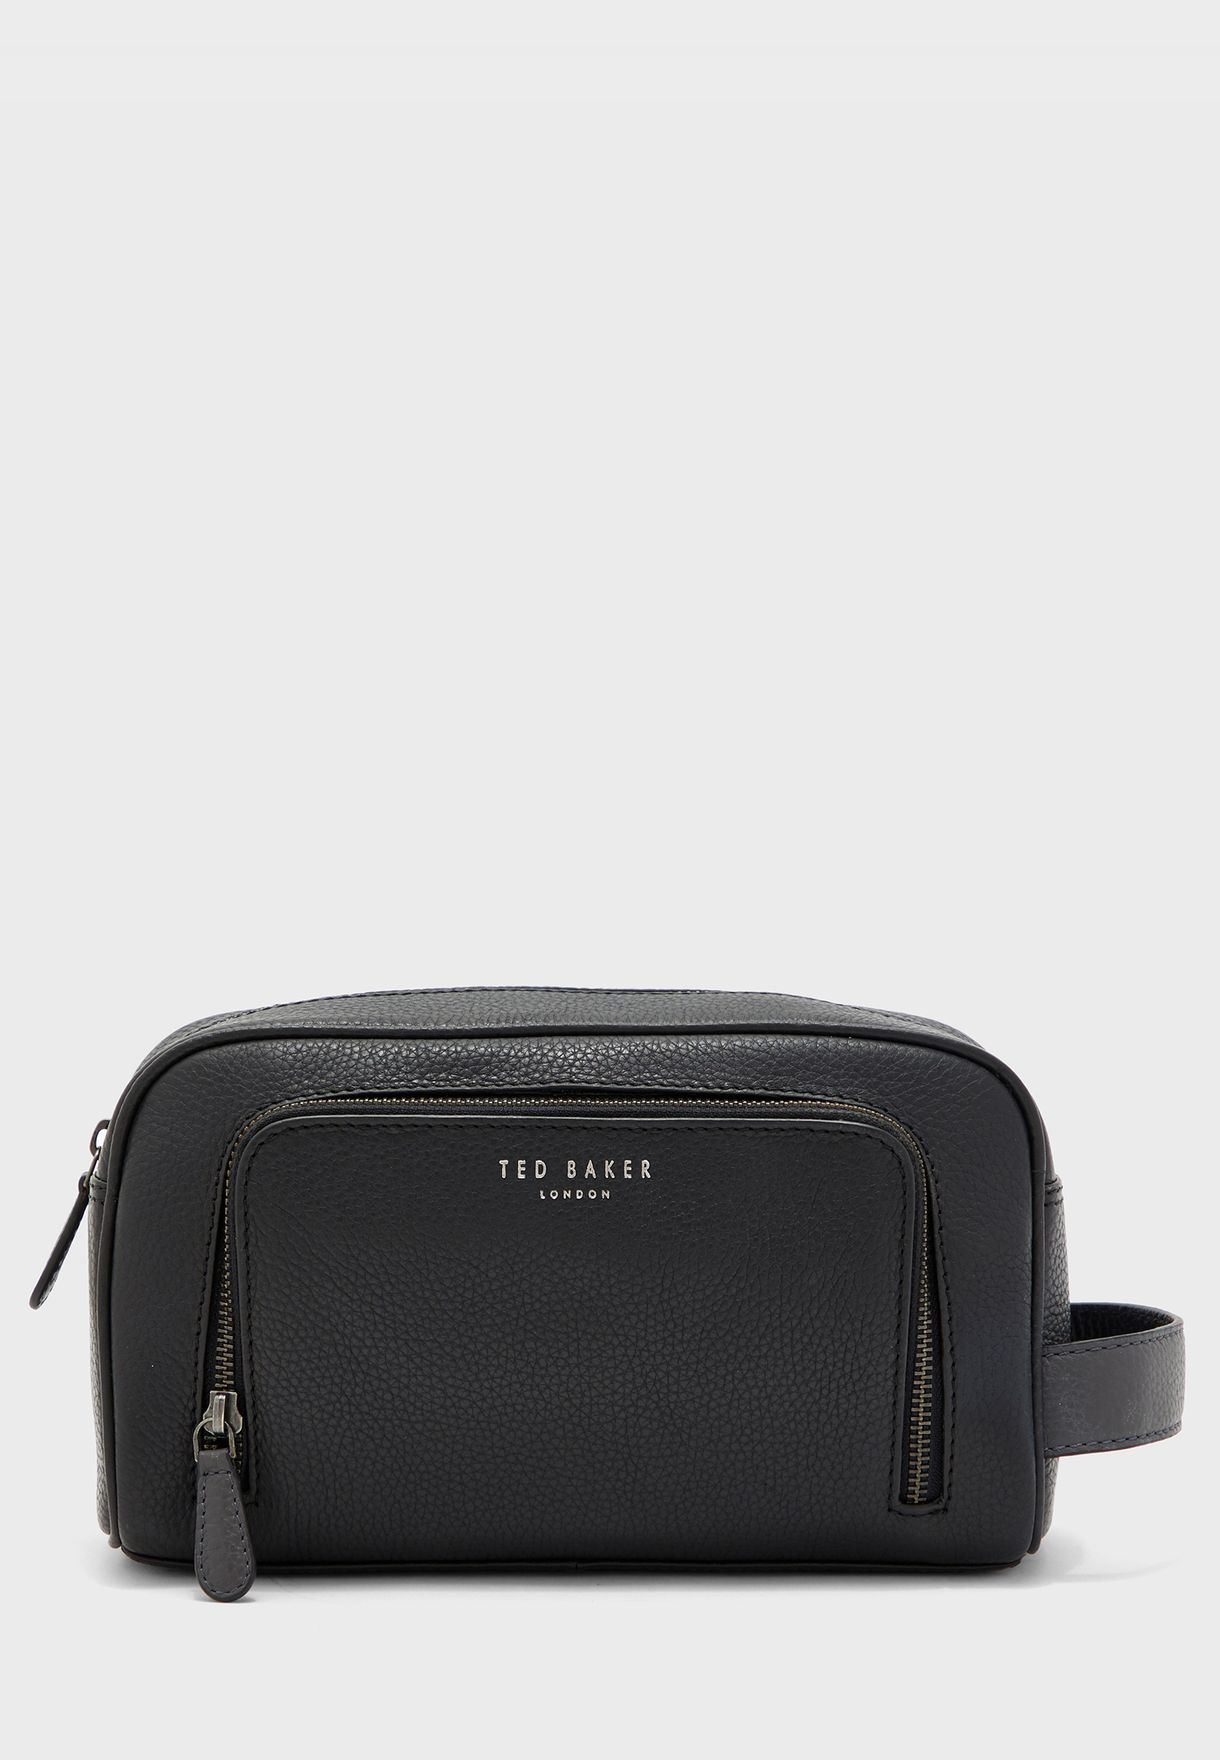 Ted Baker Bags Mens Sales Cheapest, Save 69% | jlcatj.gob.mx